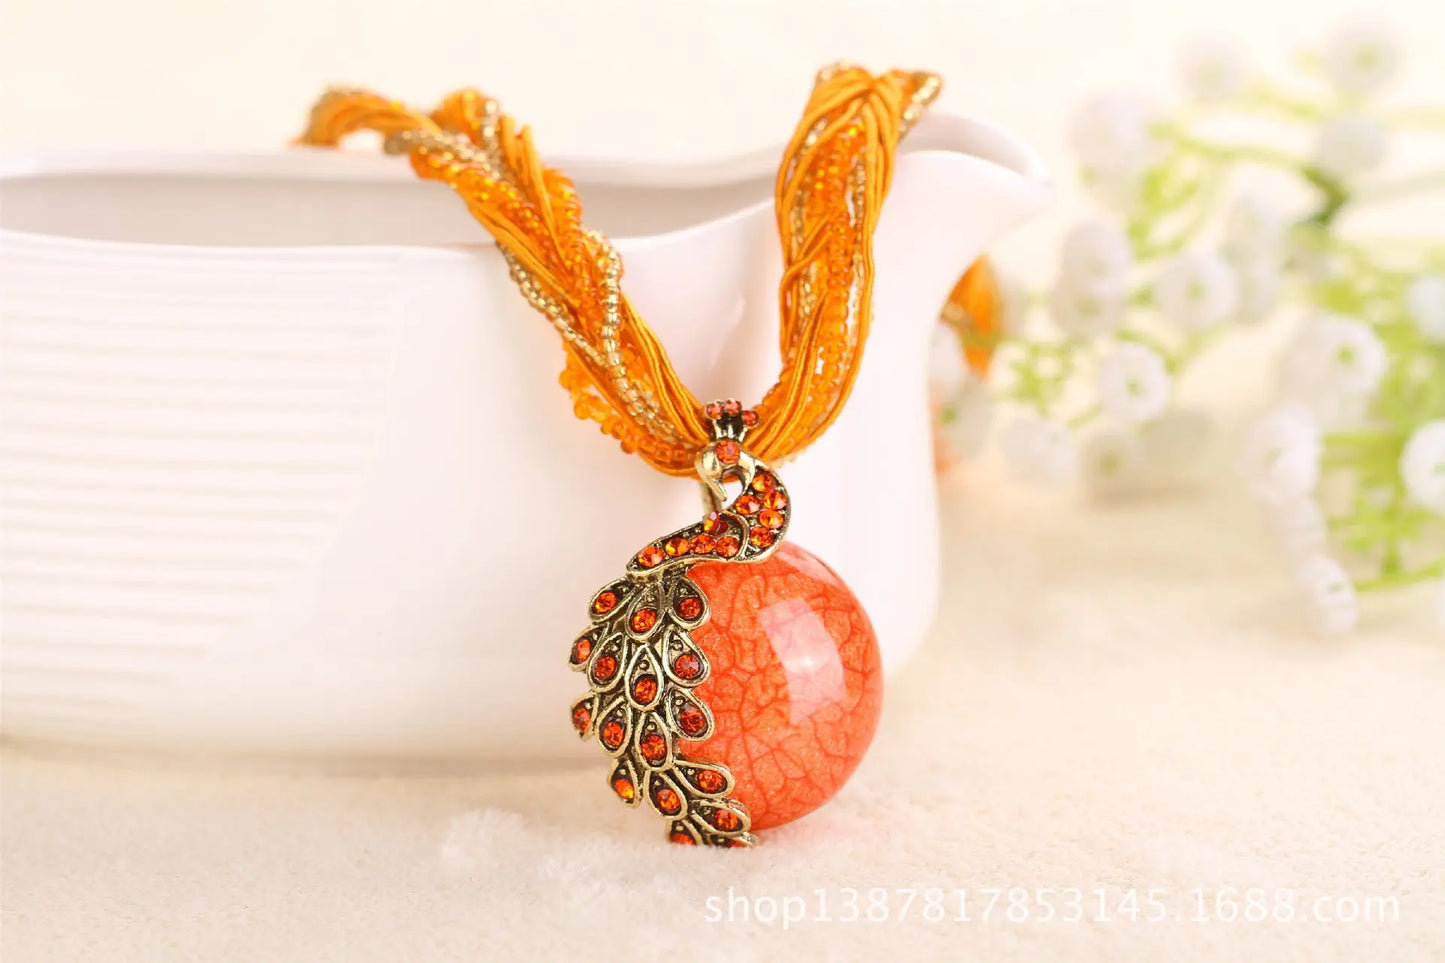 Boho Ethnic Jewelry Choker Handmade Pendant Necklace Natural Stone Bead Peacock Statement Maxi Necklace for Women Girls Gifts - Trending's Arena Beauty Boho Ethnic Jewelry Choker Handmade Pendant Necklace Natural Stone Bead Peacock Statement Maxi Necklace for Women Girls Gifts Electronics Facial & Neck orange